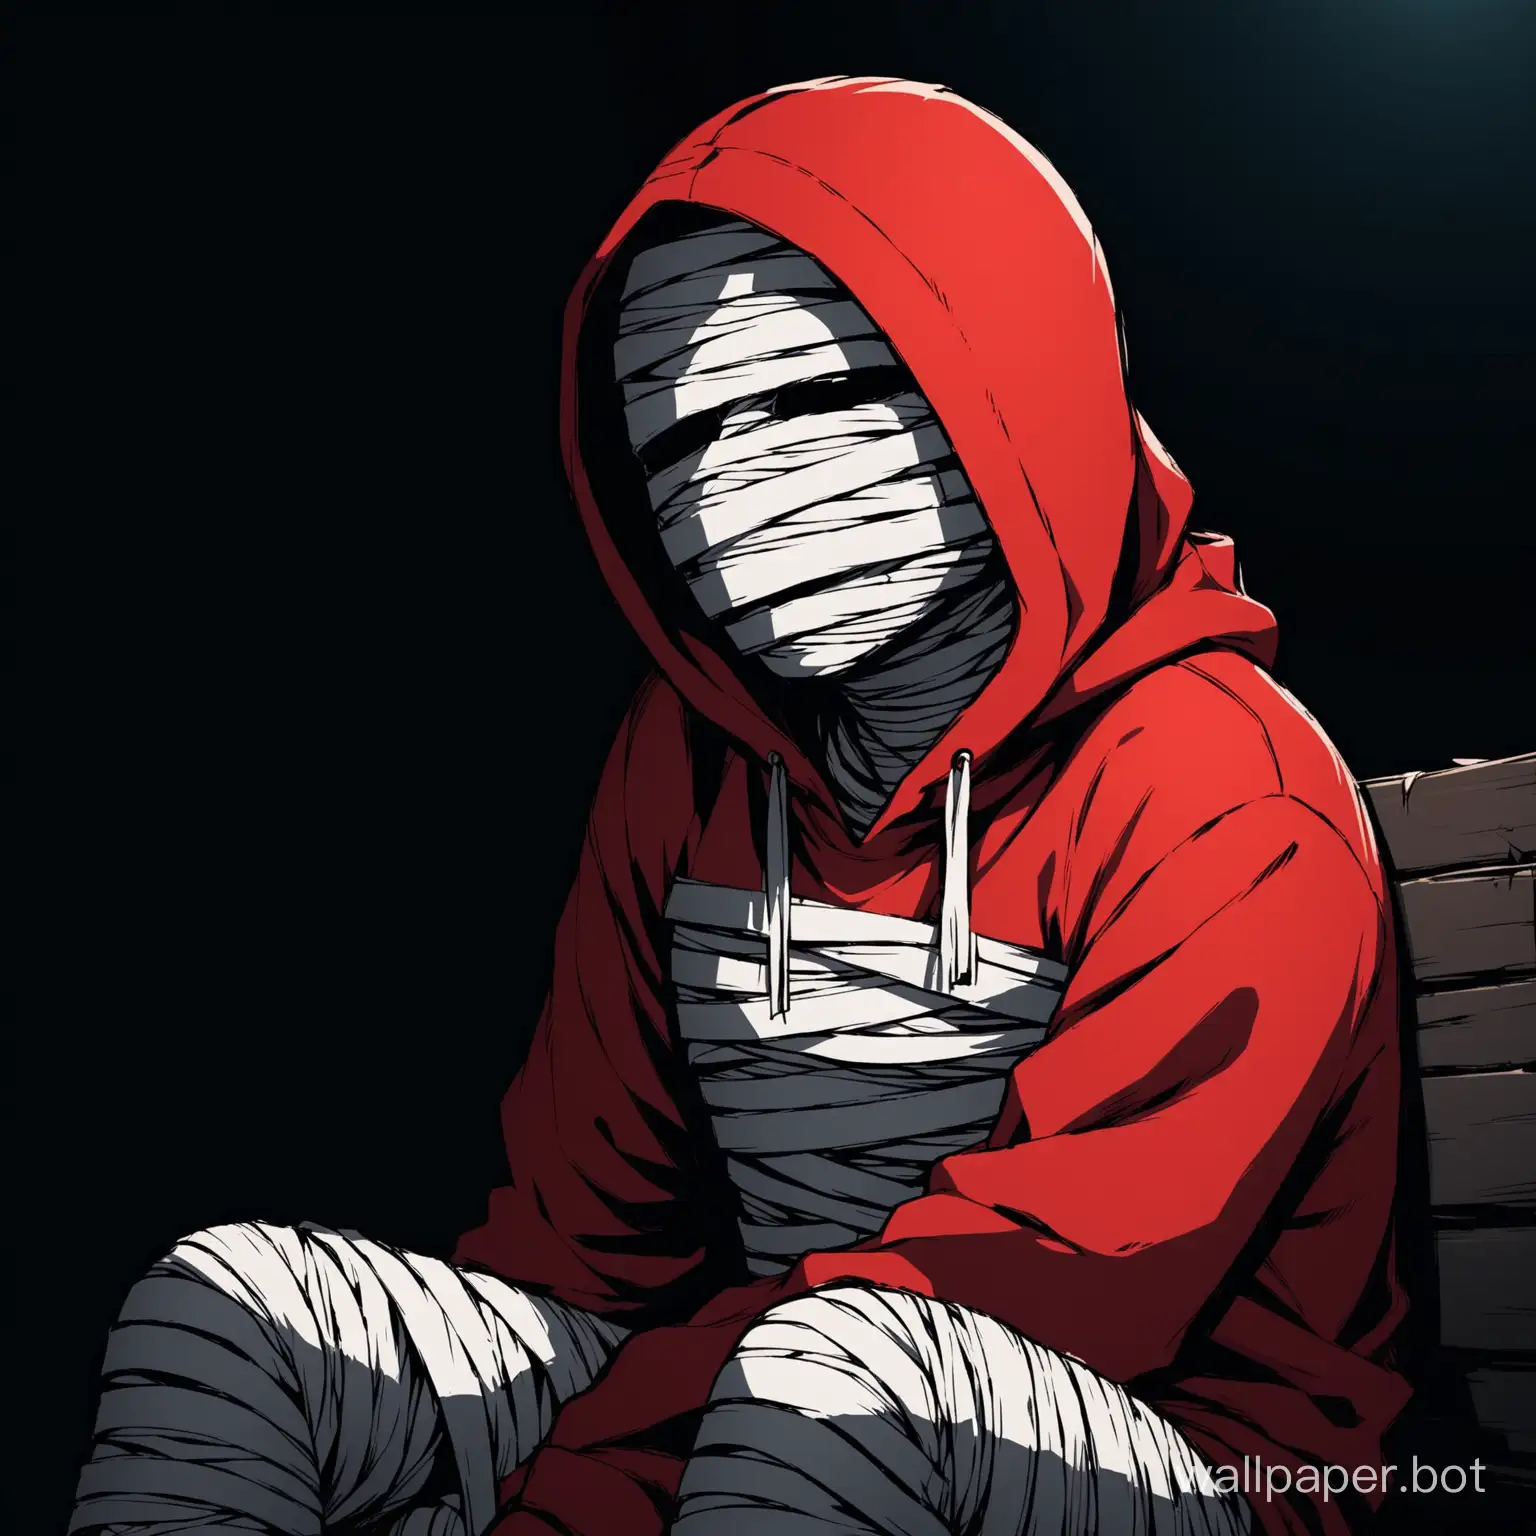 Man-in-Red-Hoodie-Crying-in-Darkness-with-Bandaged-Face